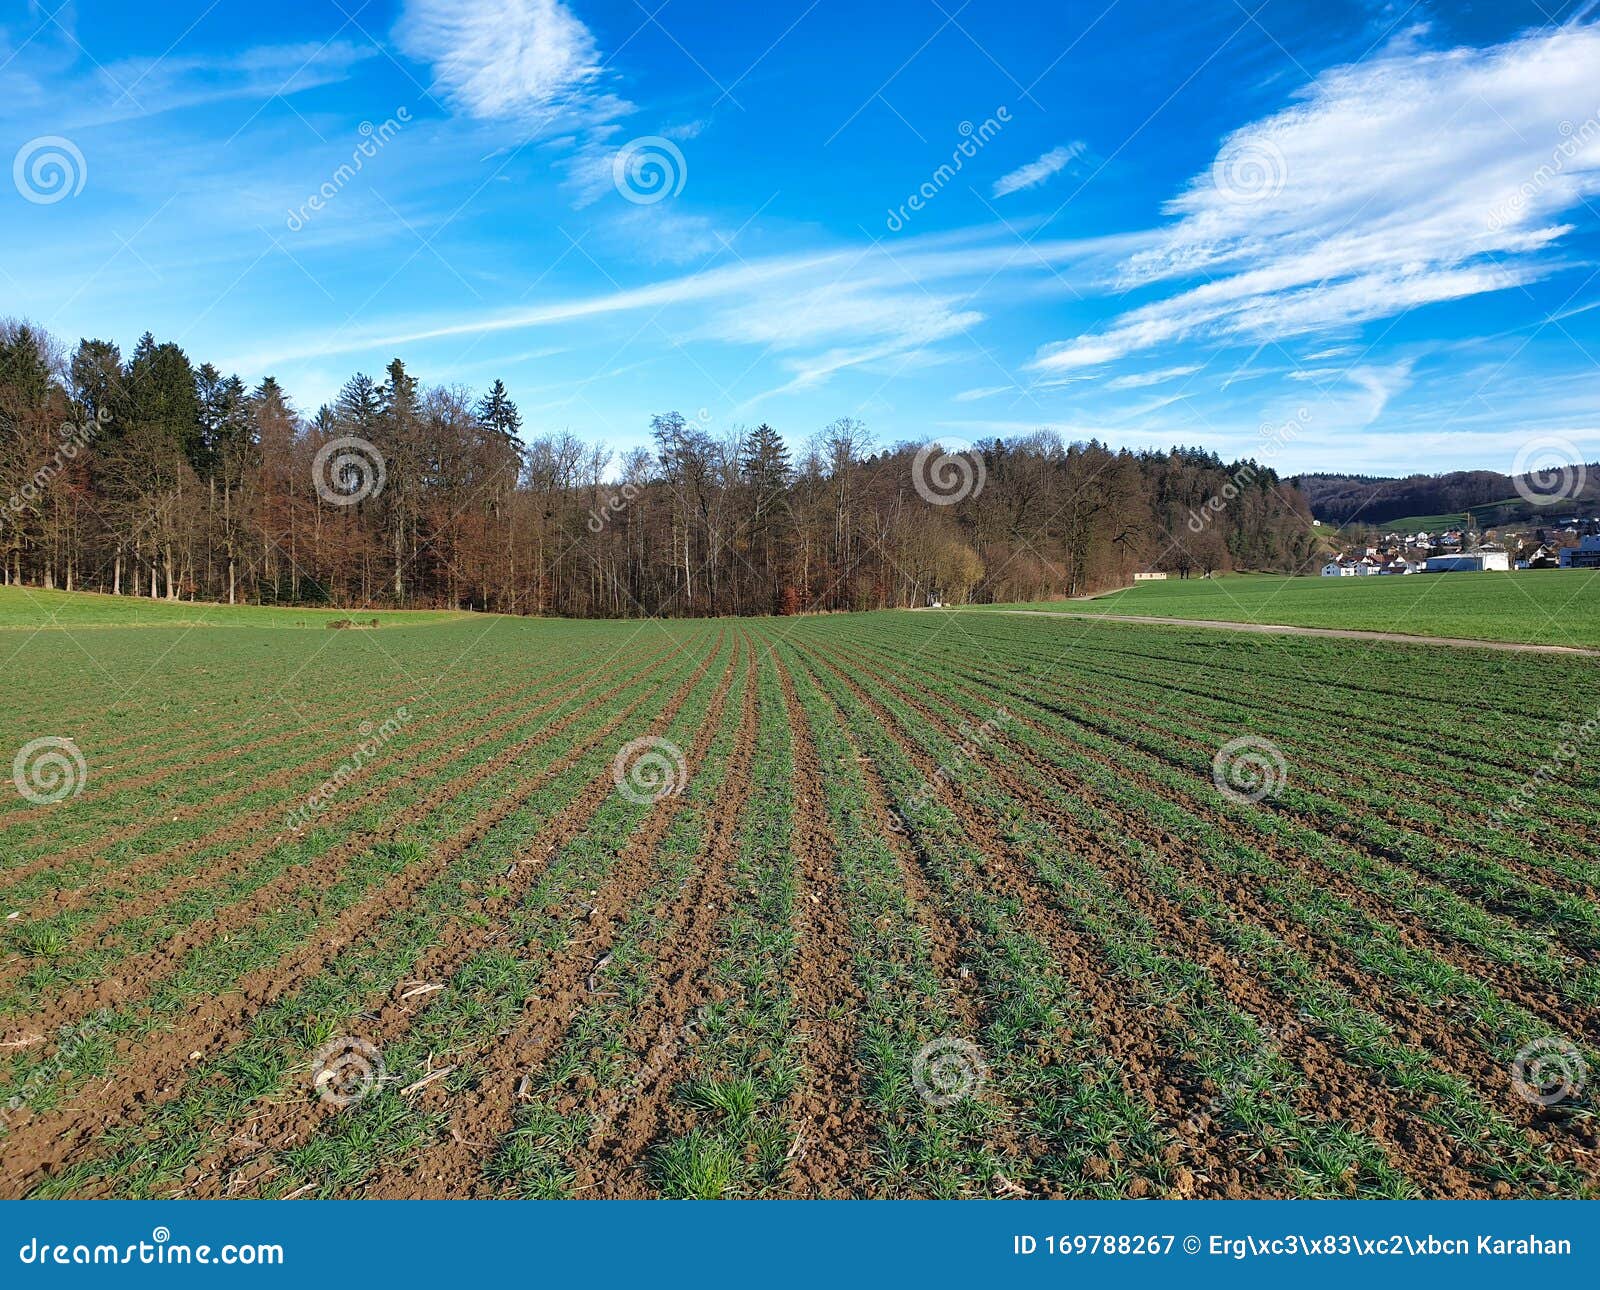 crop rotation of an agricultural field.